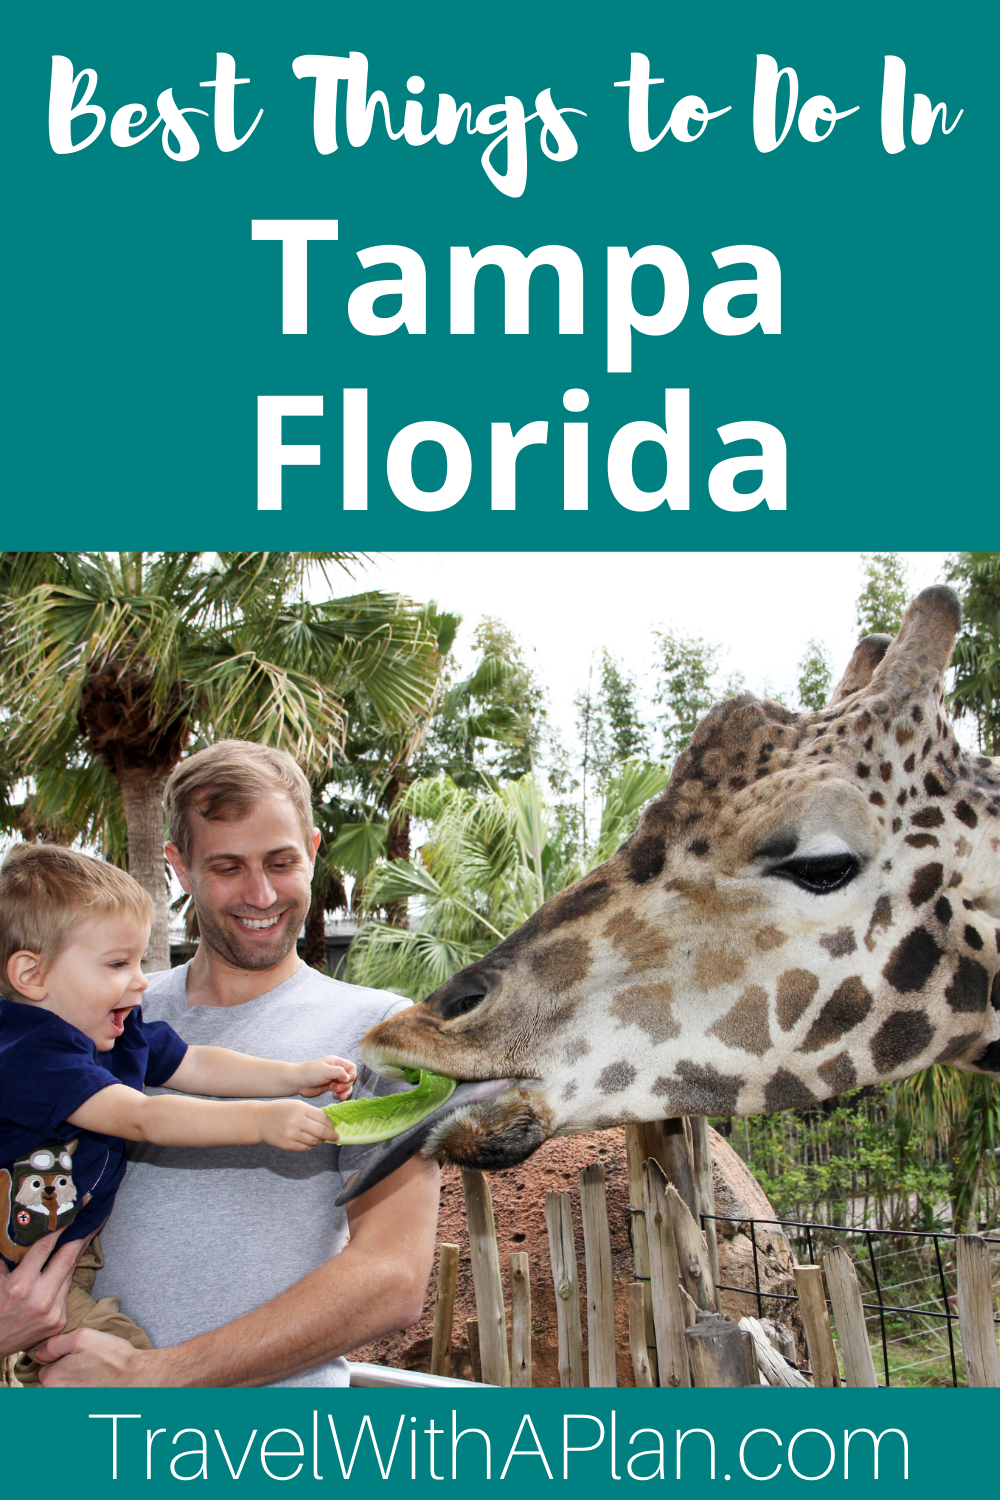 Find out the most fun things to do in Tampa while on vacation from Top US Family Travel Blog, Travel With A Plan!